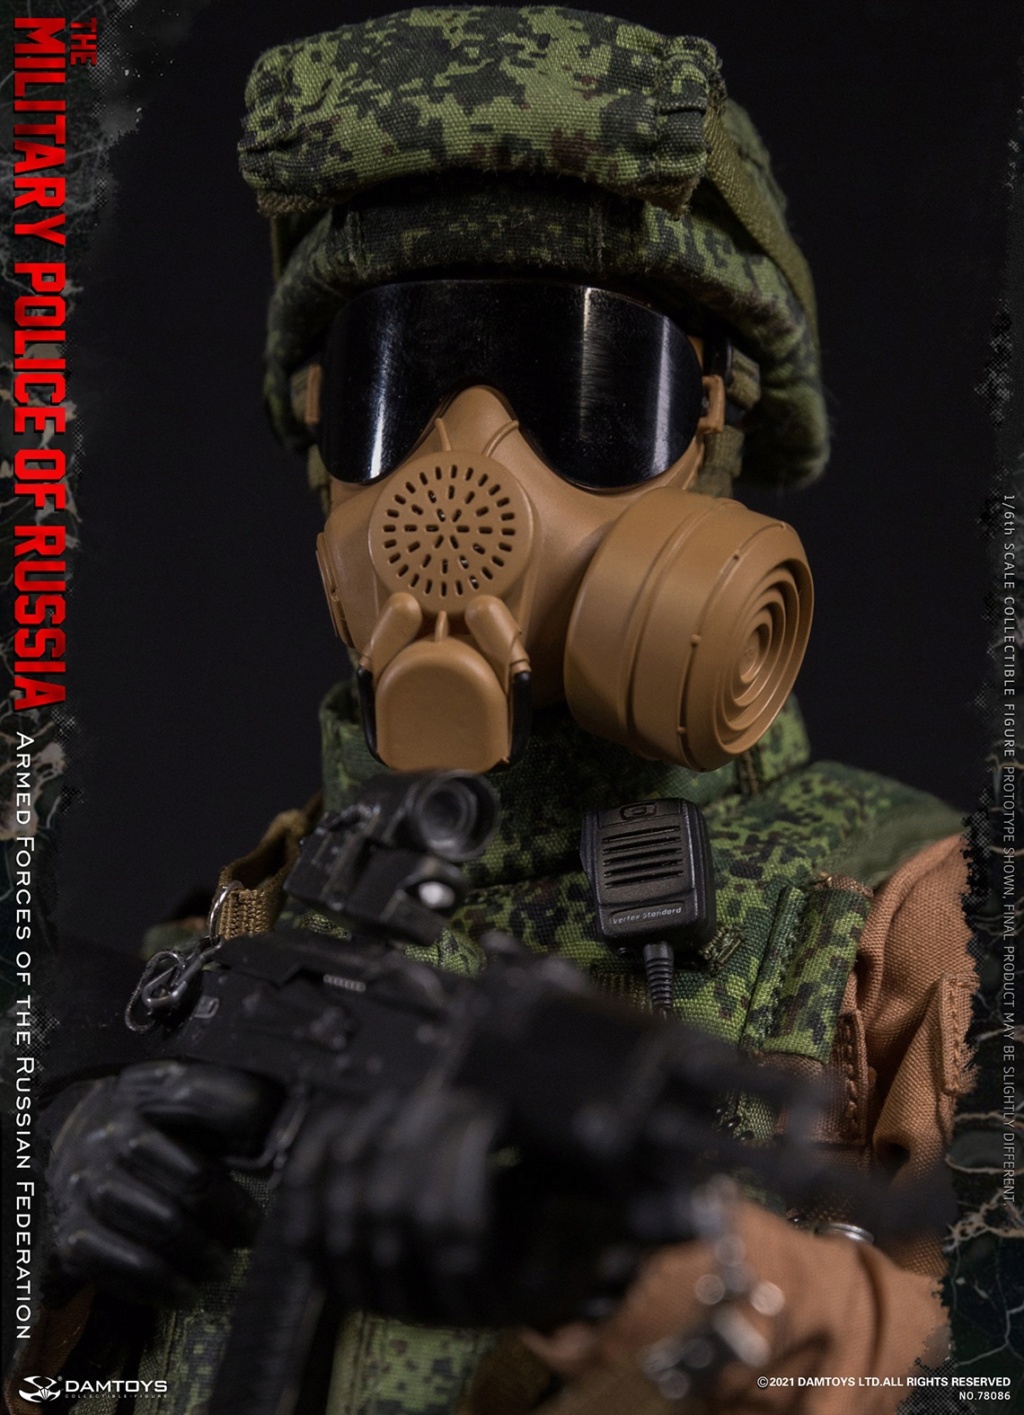 NEW PRODUCT: DAMTOYS: 1/6 Russian Federation Armed Forces-Gendarmerie #78086 15043711